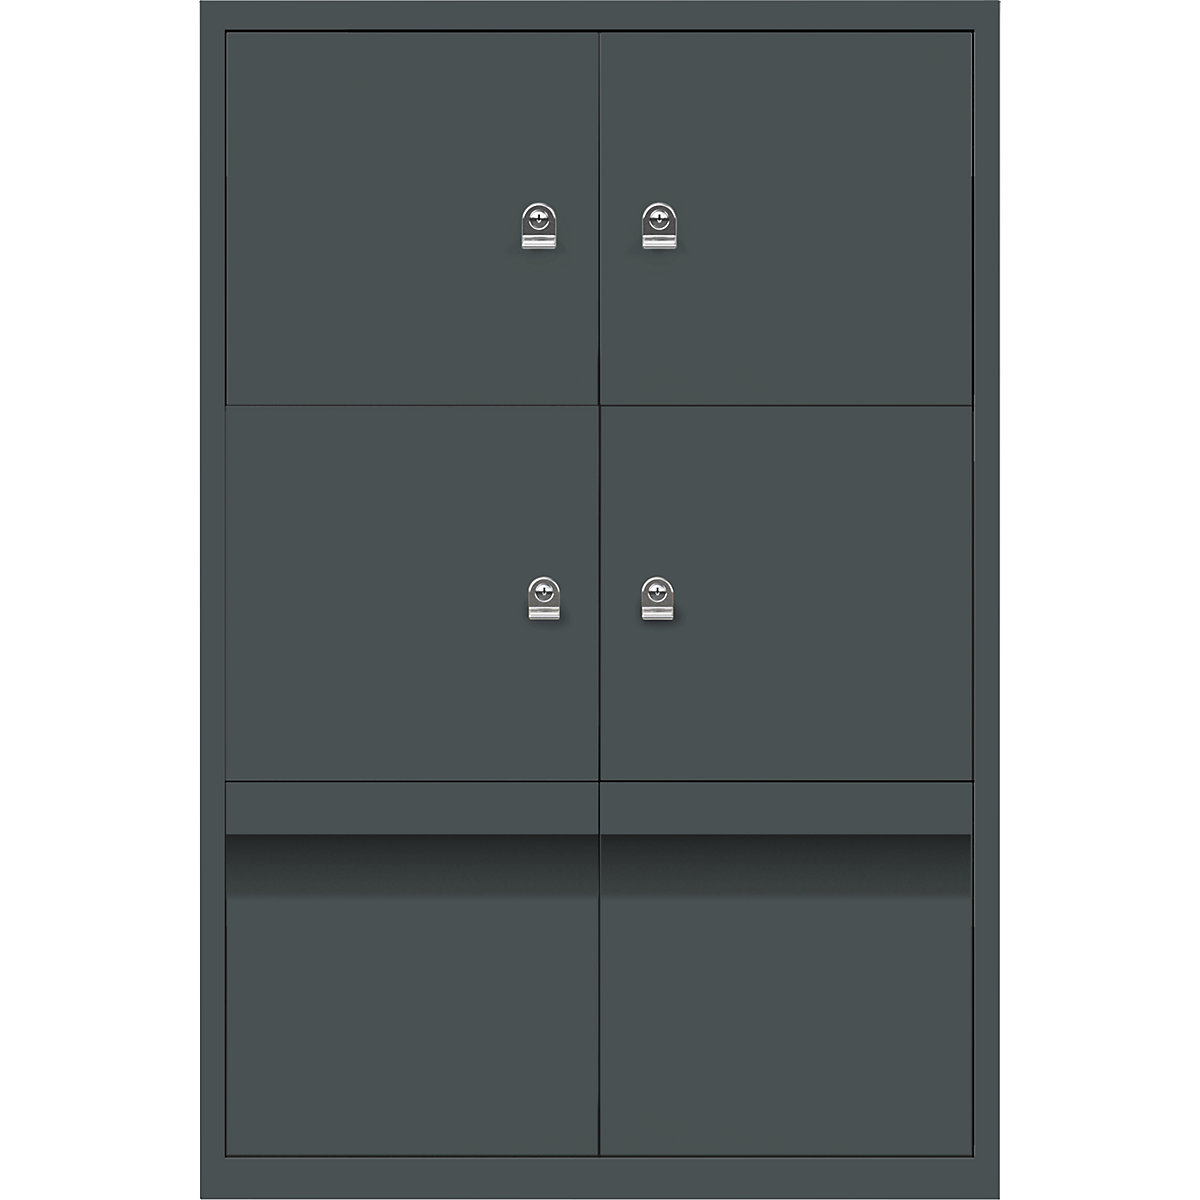 LateralFile™ lodge – BISLEY, with 4 lockable compartments and 2 drawers, height 375 mm each, charcoal-21